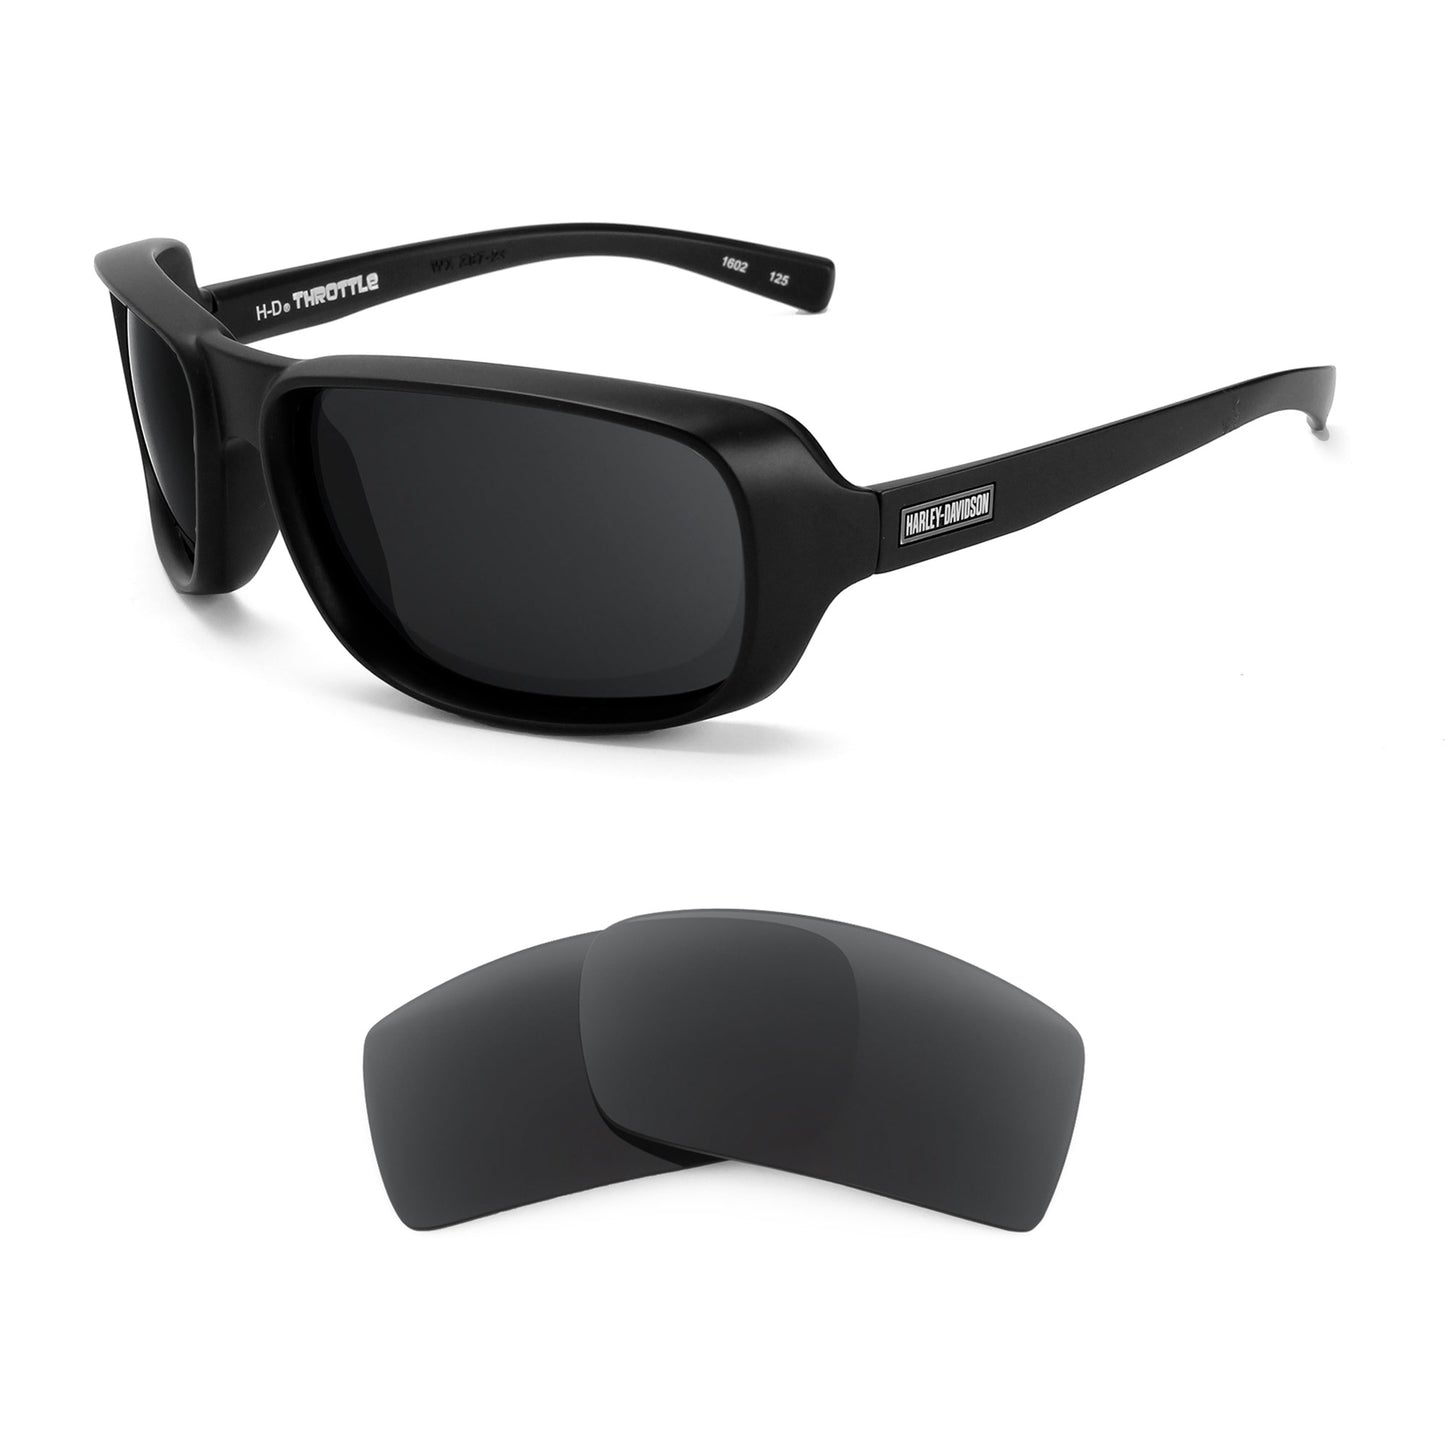 Harley Davidson H-D Throttle sunglasses with replacement lenses